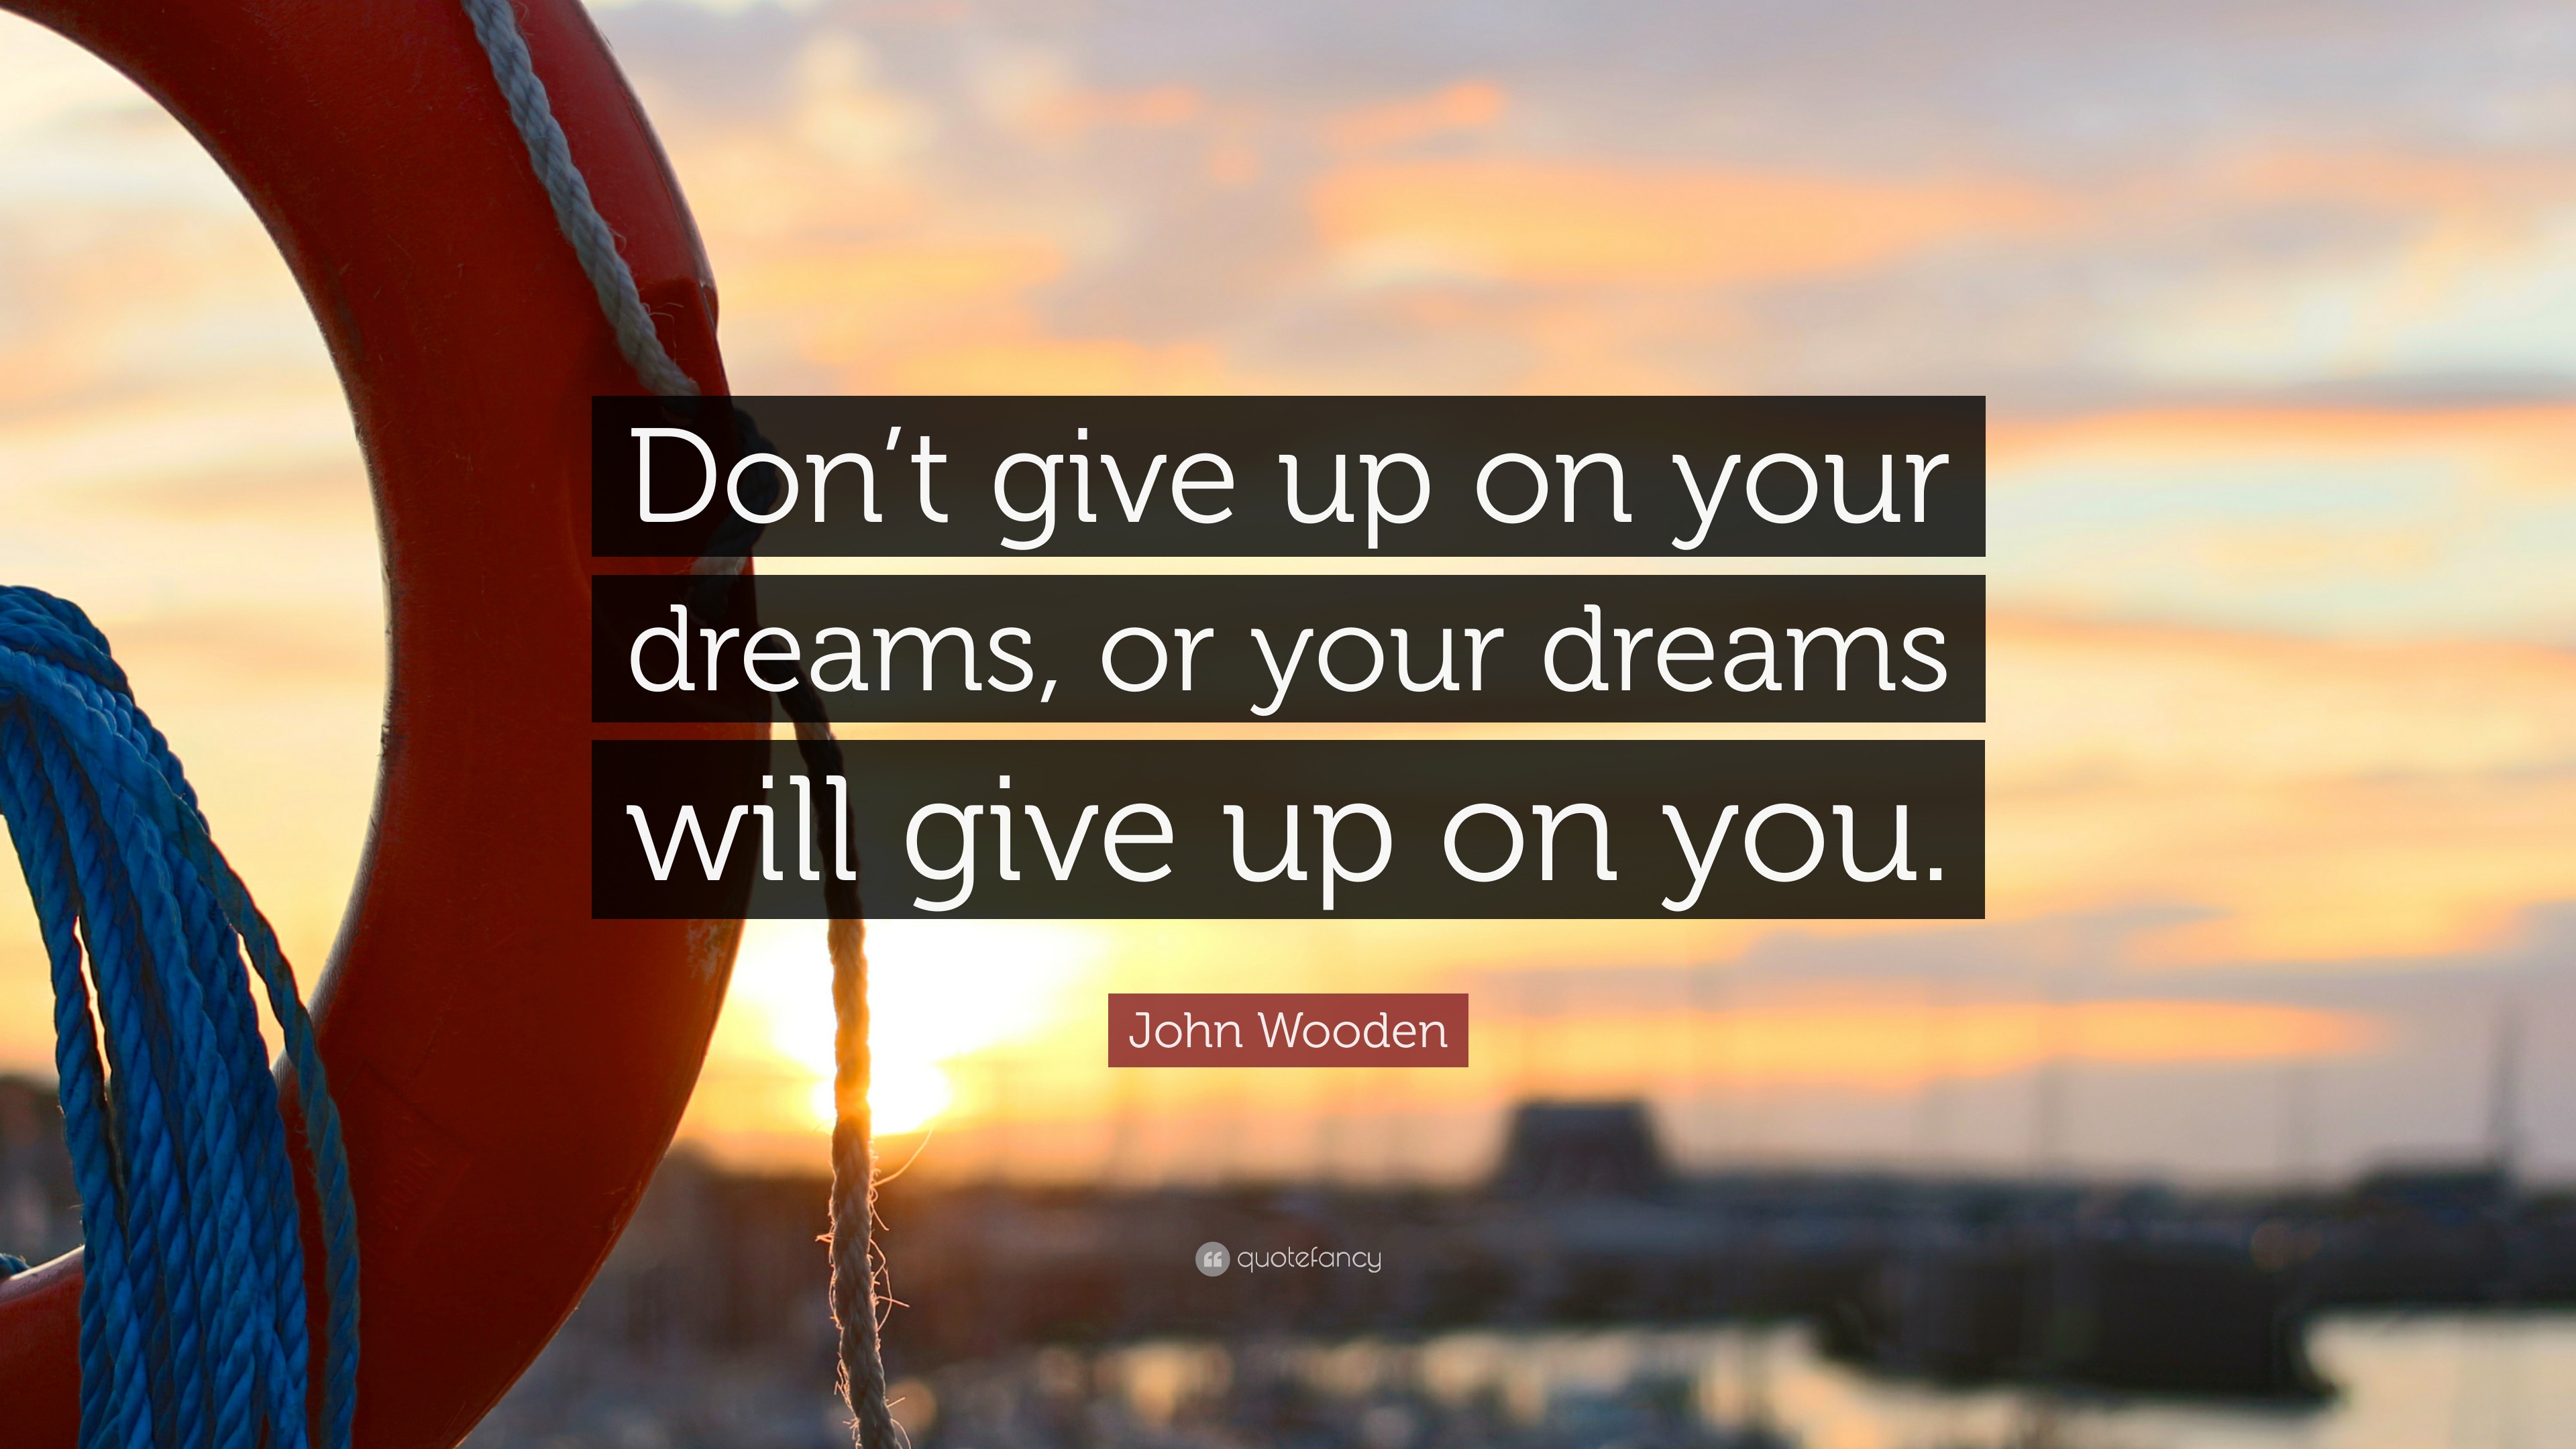 John Wooden Quote: “Don’t give up on your dreams, or your dreams will ...